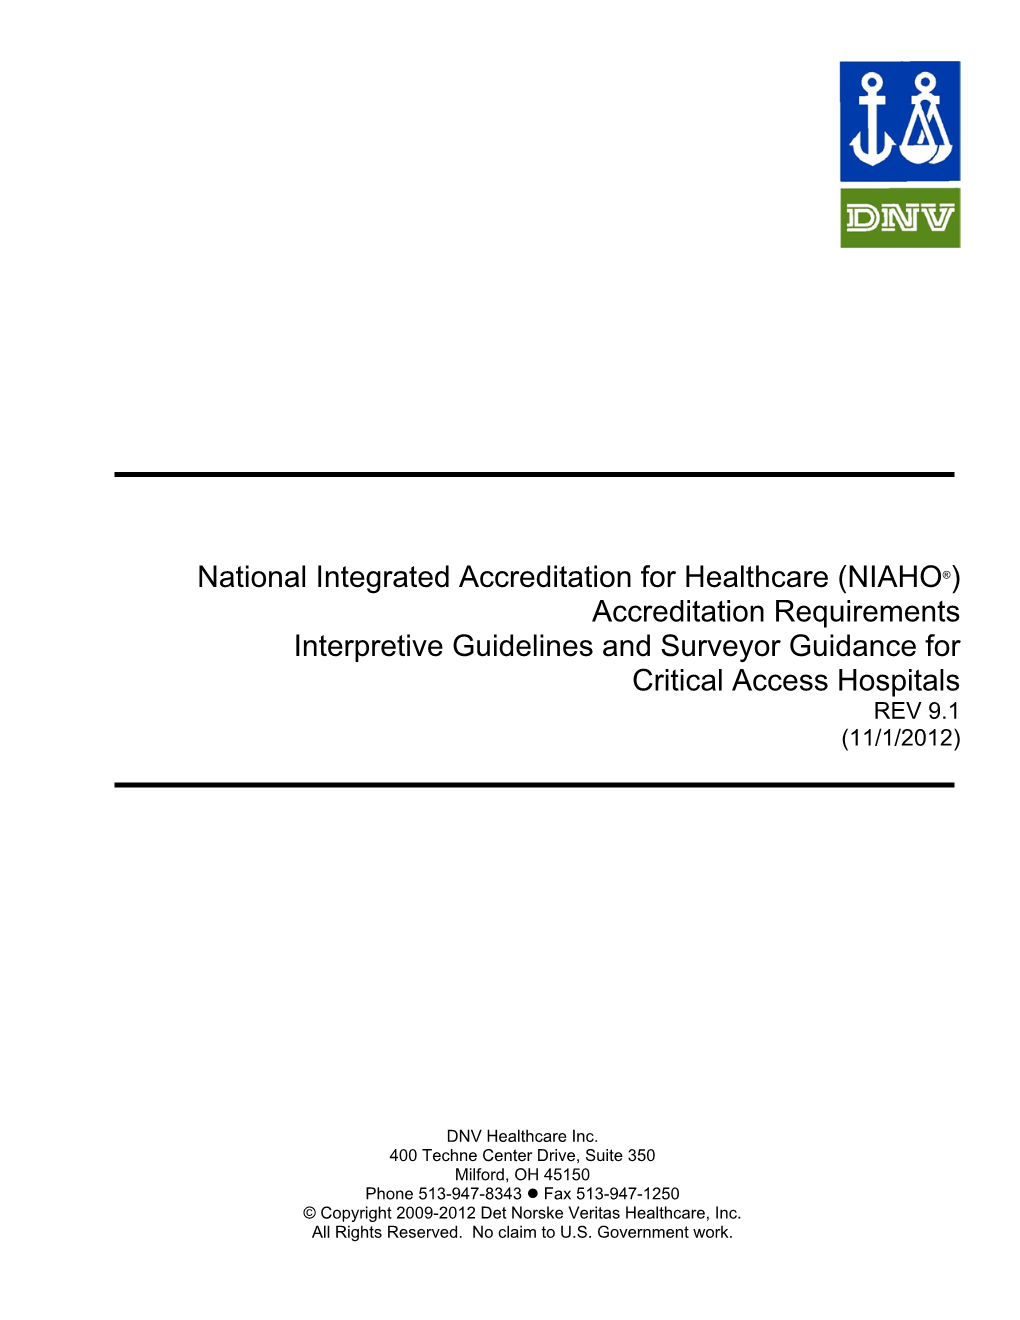 NIAHO®) Accreditation Requirements Interpretive Guidelines and Surveyor Guidance for Critical Access Hospitals REV 9.1 (11/1/2012